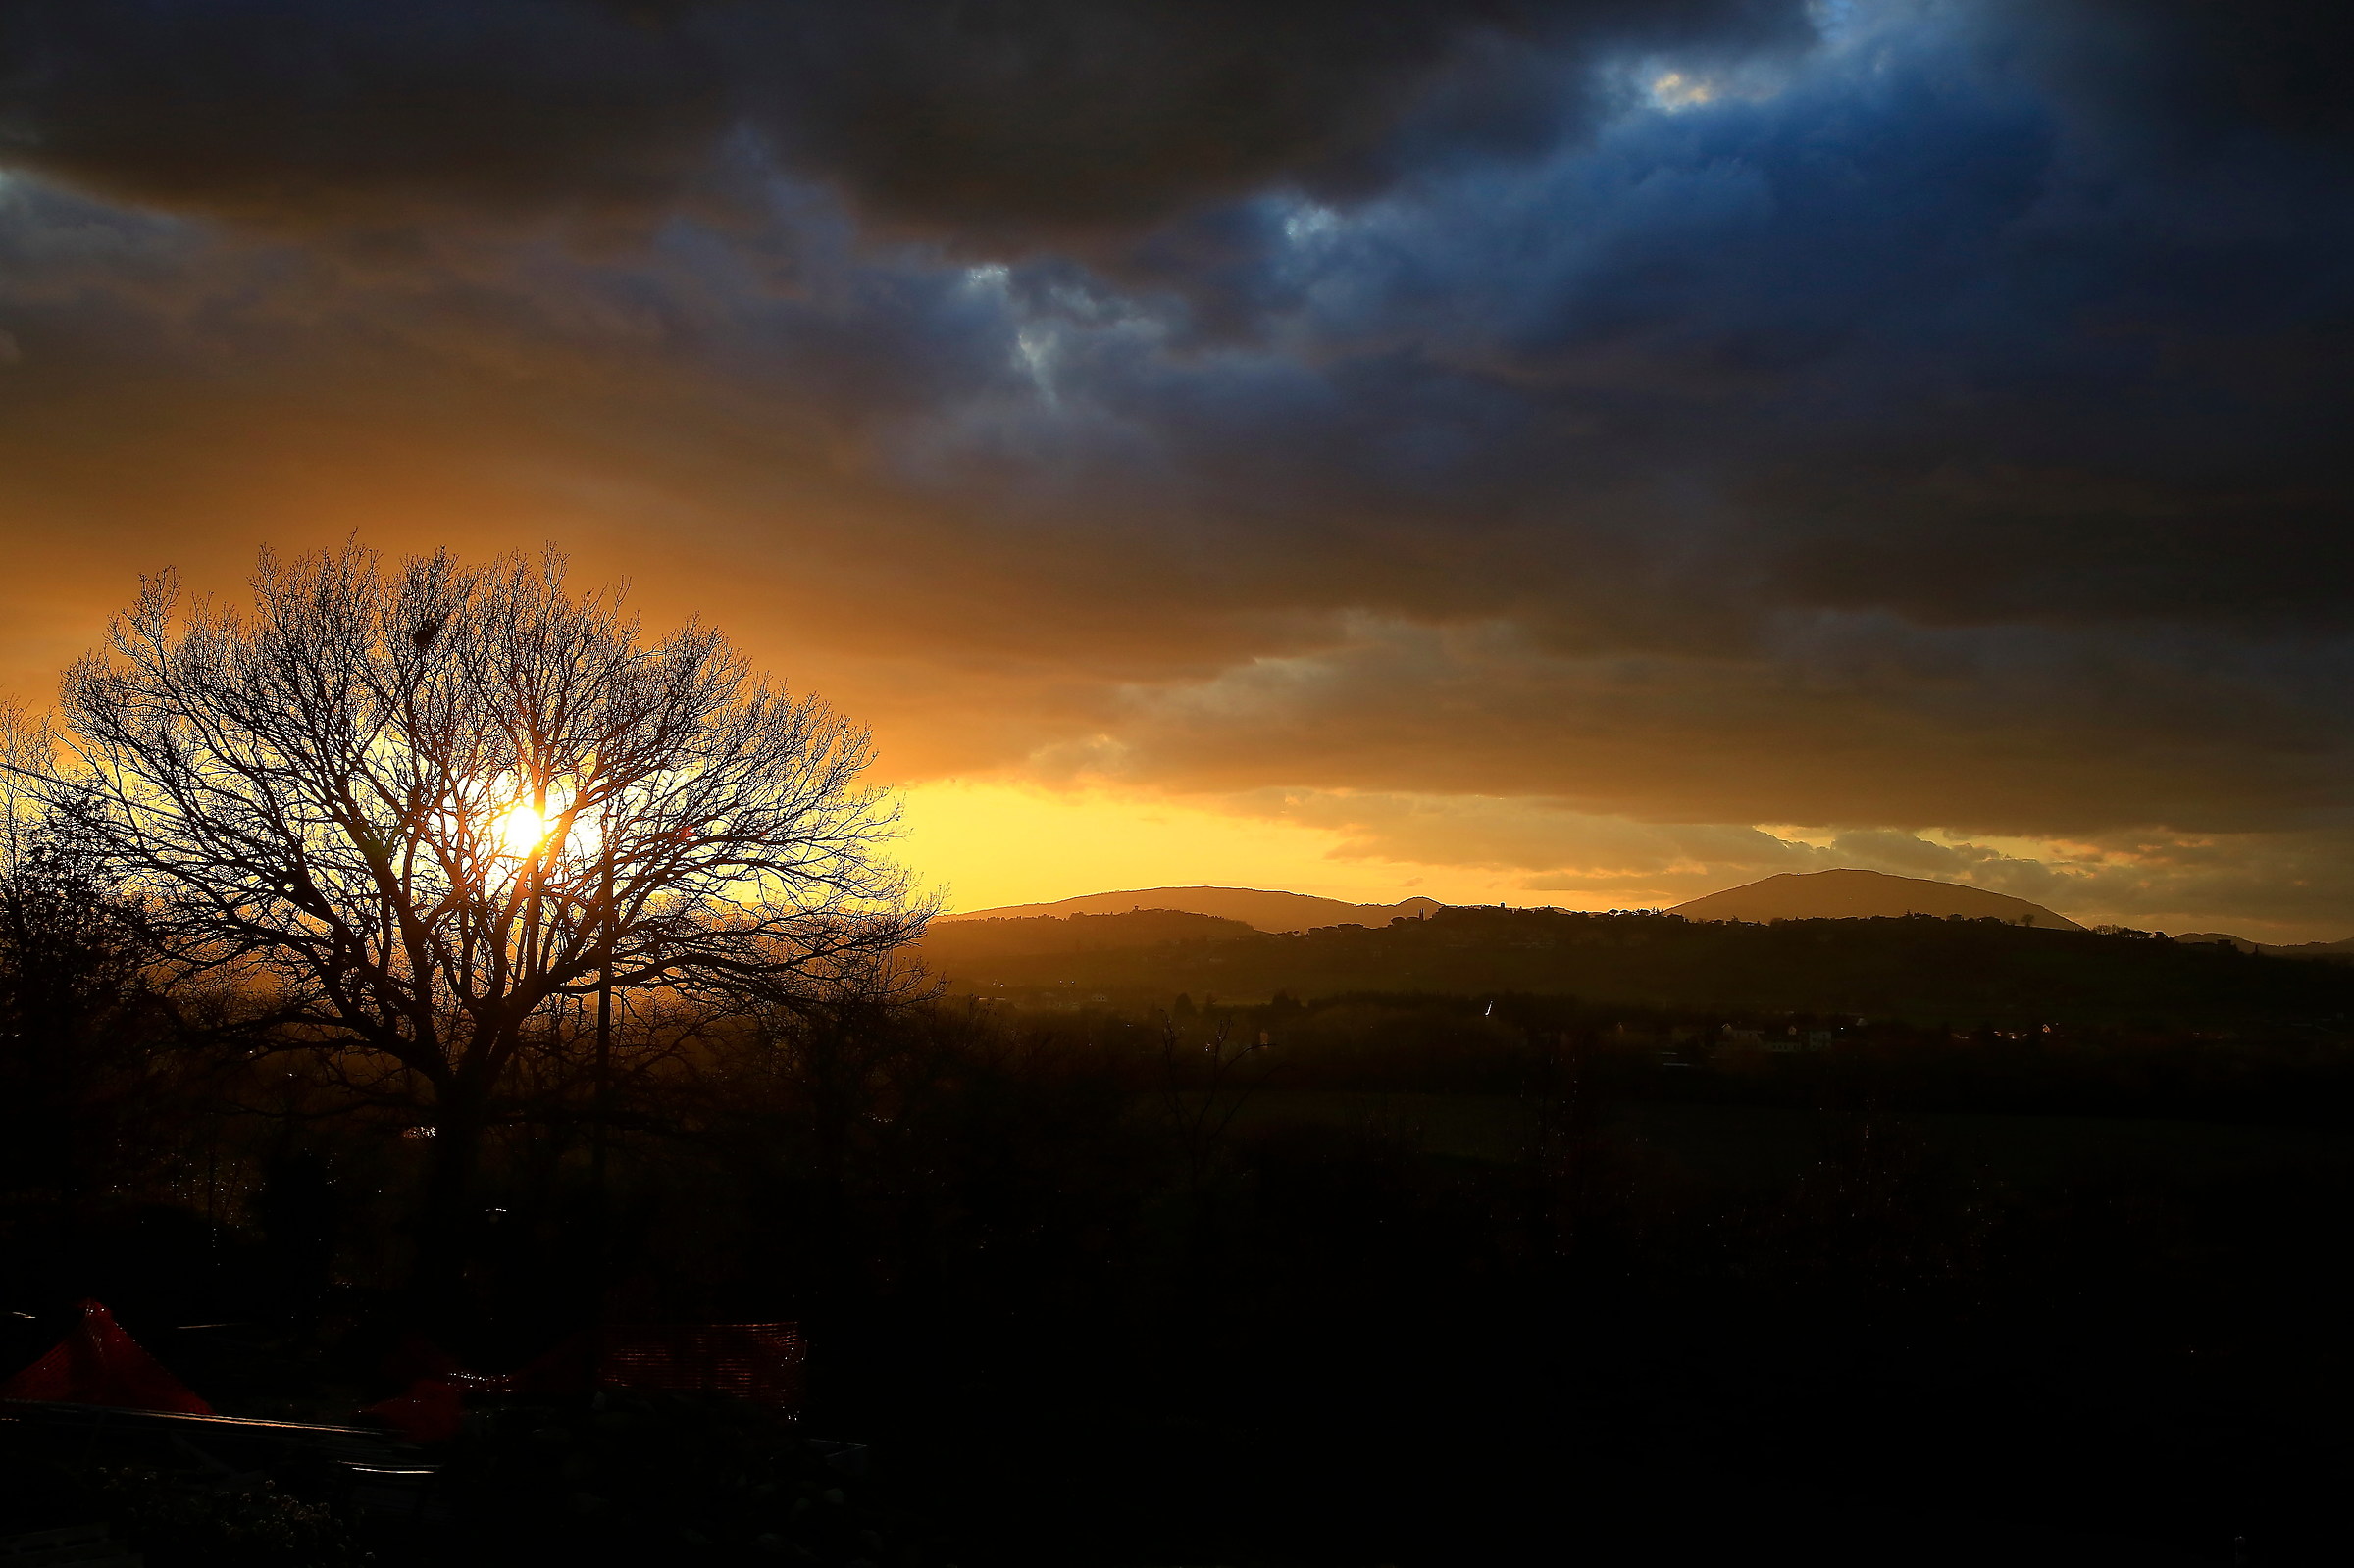 Sunset over the Umbrian hills...